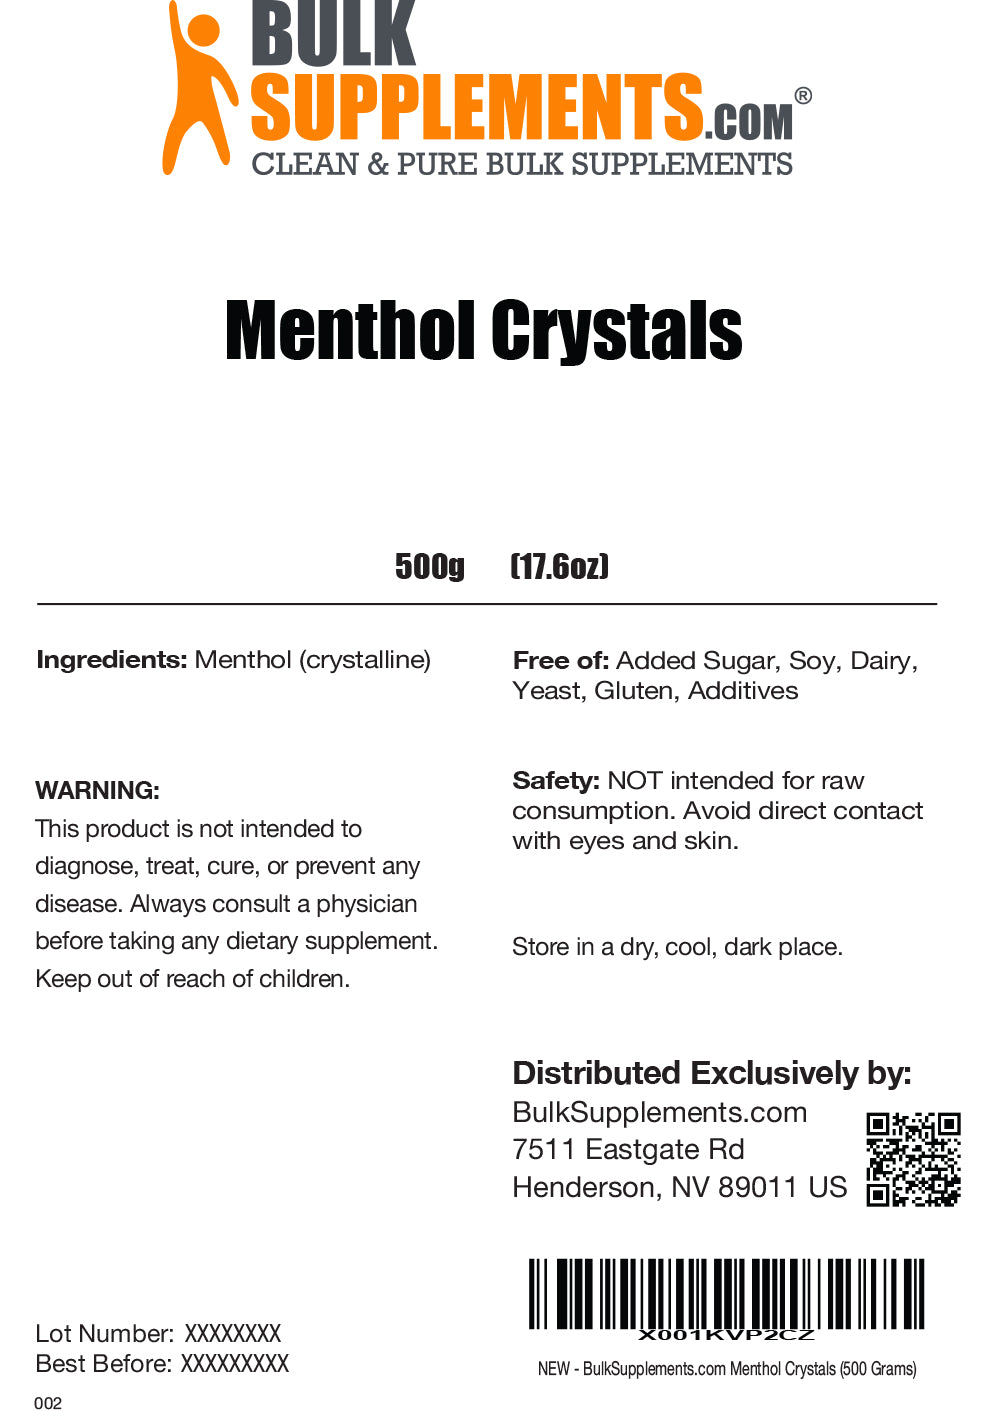 Ingredients and Safety Warnings Menthol Crystals